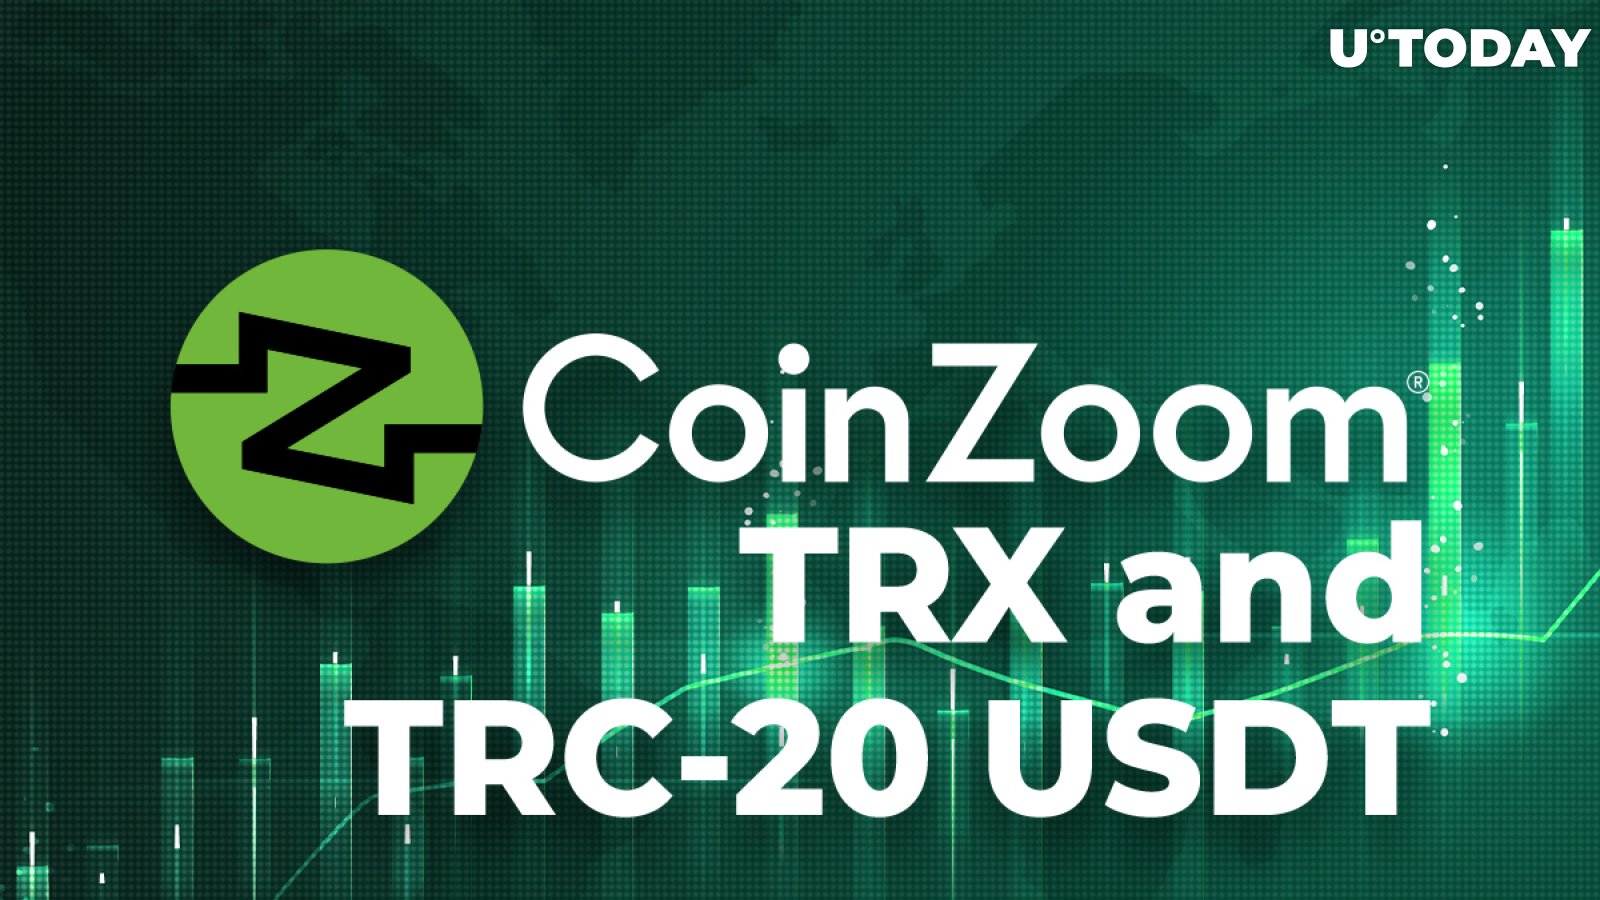 Mainstream Centralized Exchange CoinZoom adds TRX and TRC-20 USDT to Its Range of Assets